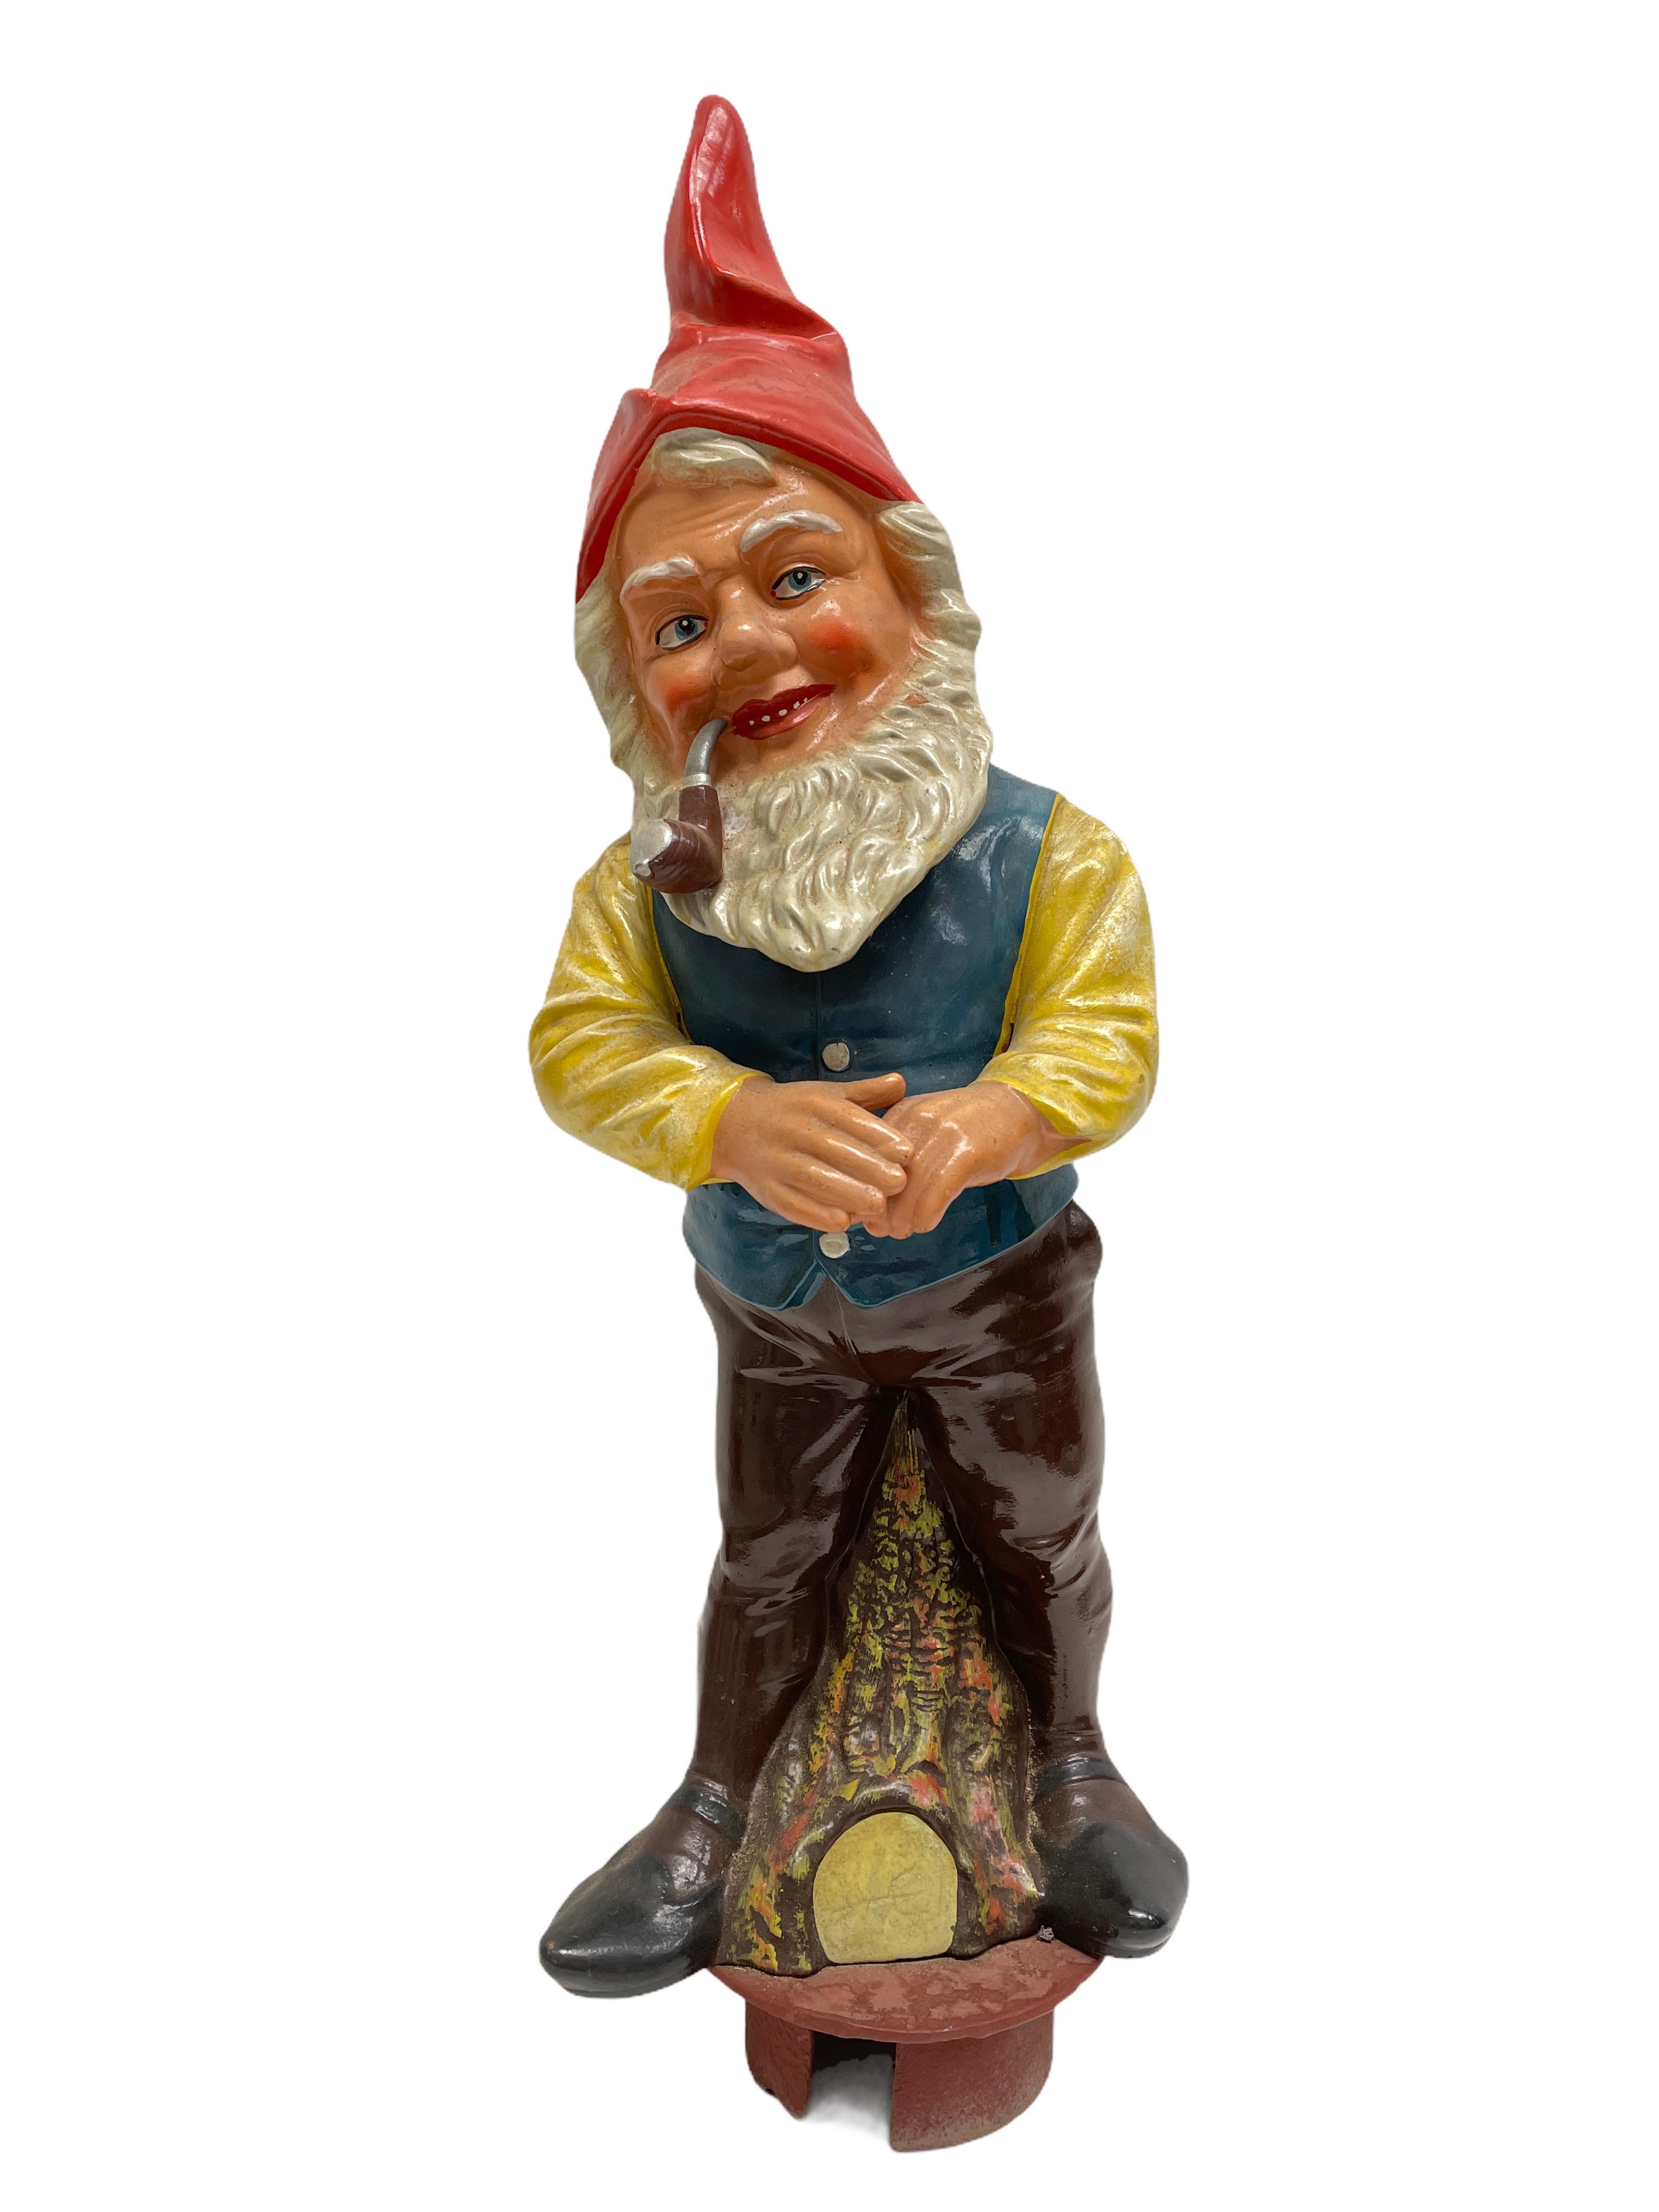 A gorgeous character ceramic figural gnome statue - attributed to Griebel Germany, a well known manufacturer of this kind of figures. This character statue has been made in Germany, in the 1930s or older. Absolutely gorgeous item with lots of